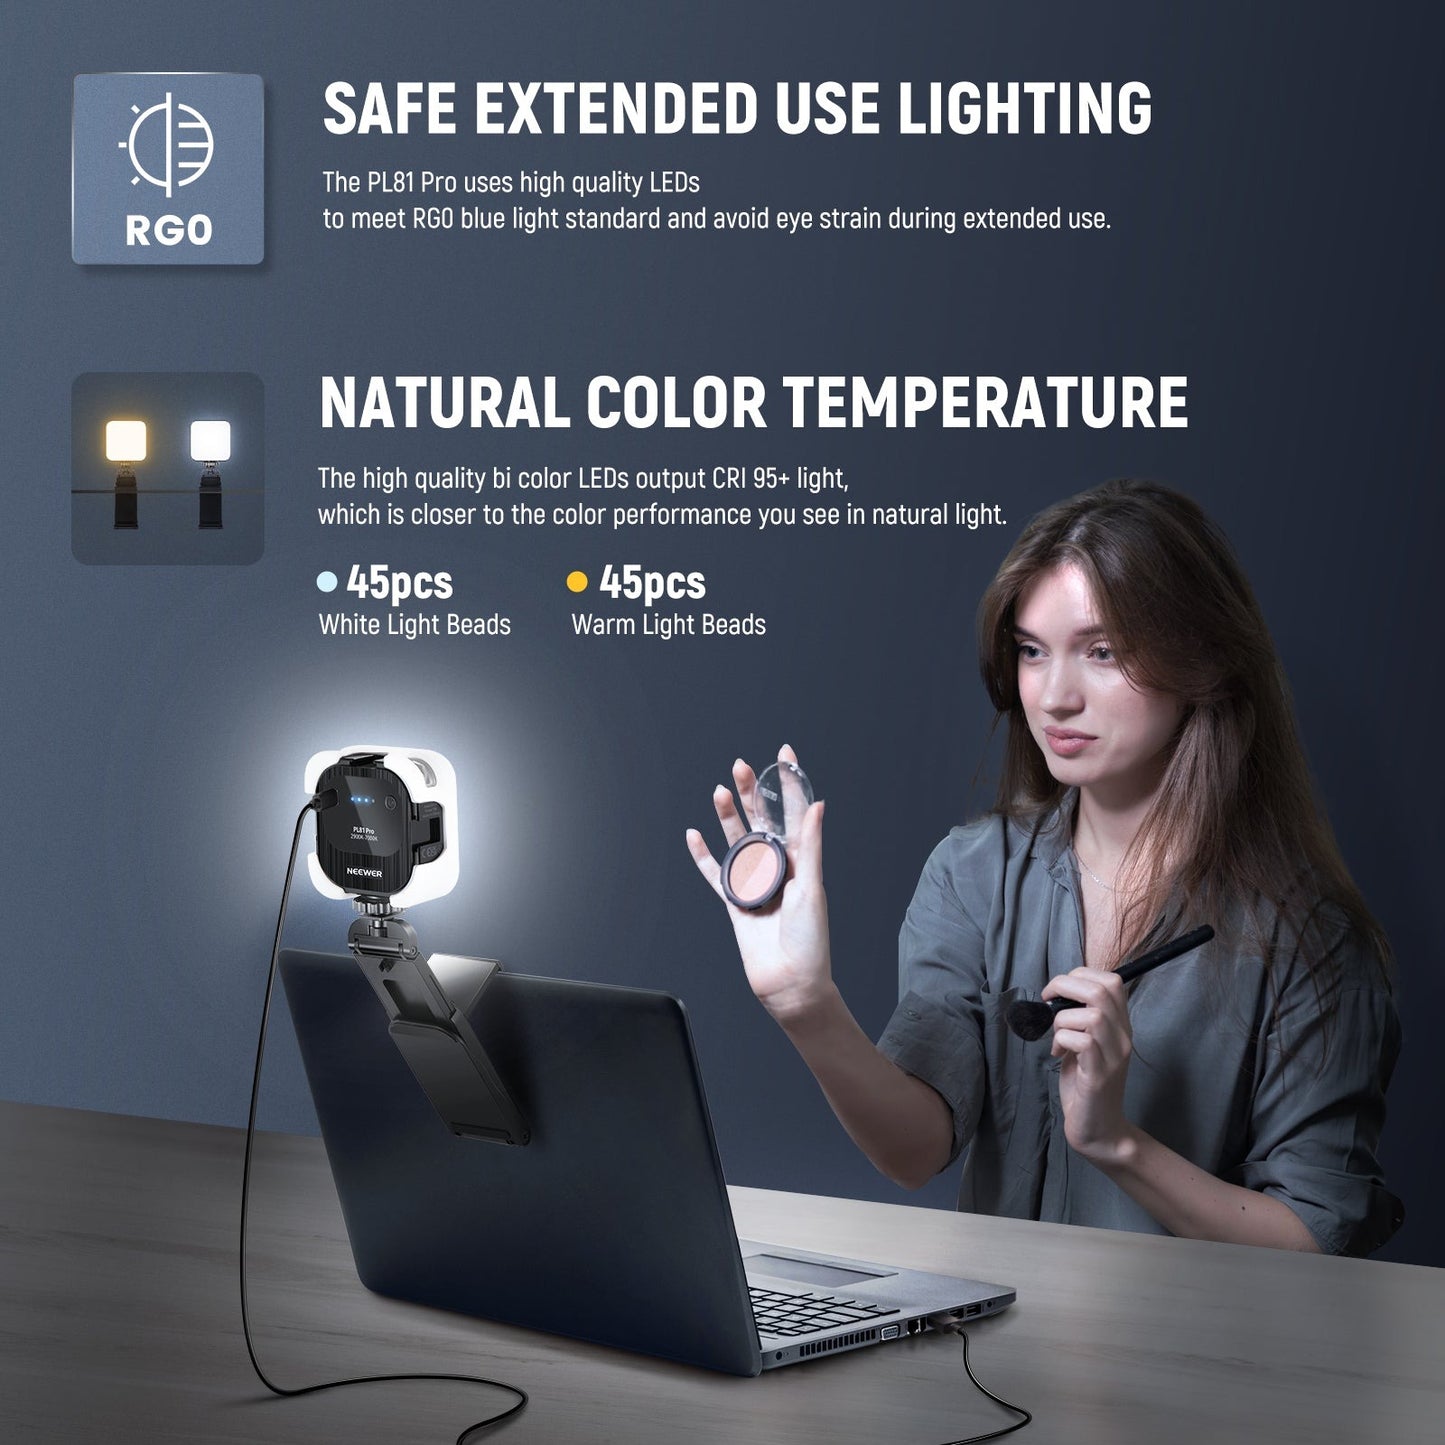 Neewer PL81 Pro 15W Bi-Color 2900K-7000K Video Professional Conference LED Light with 2-in-1 Monitor Mount & Stand, App Control for PC, Computer, Webcam Lighting, Streaming